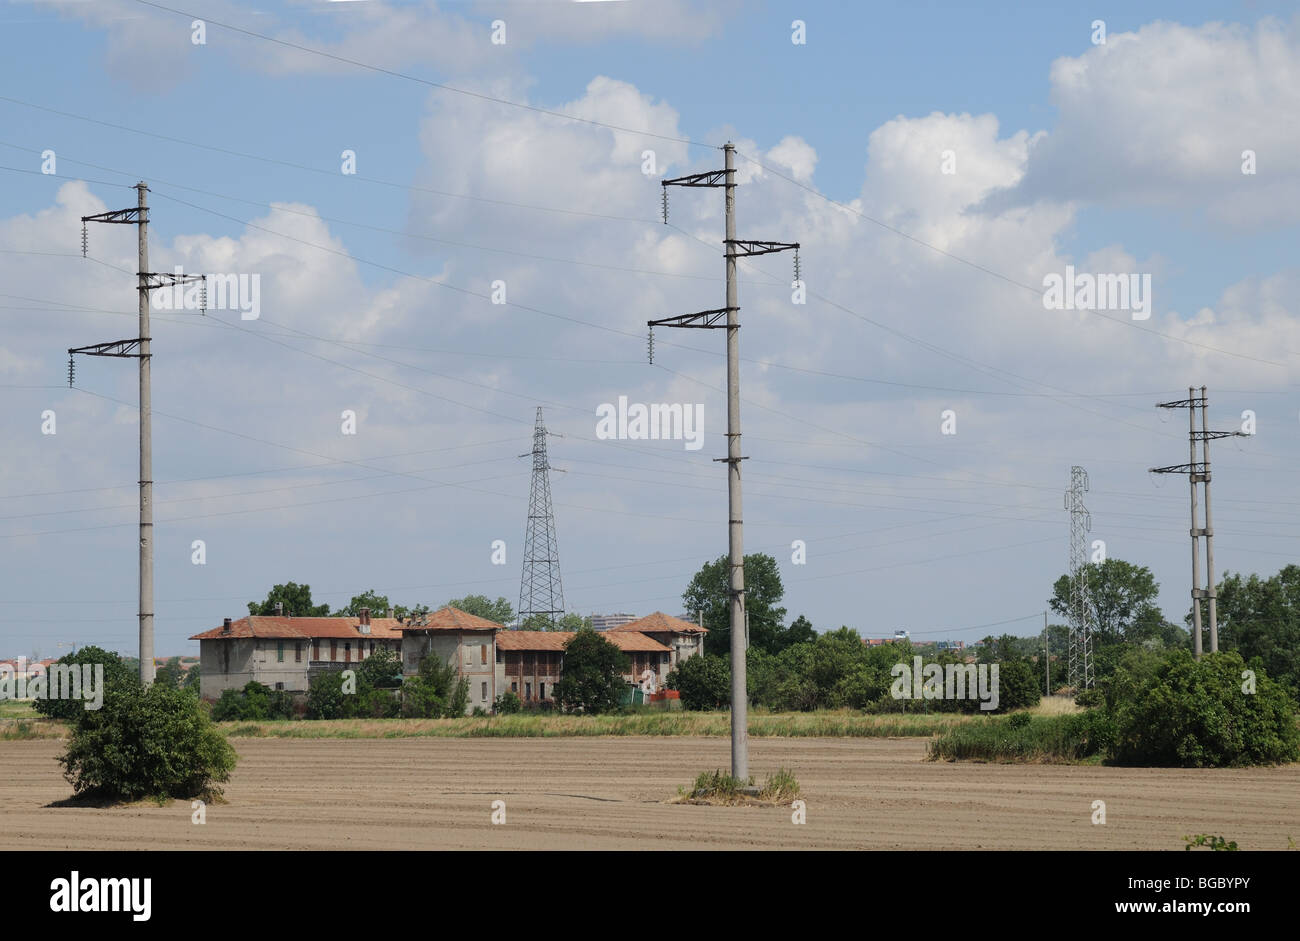 High voltage power cables wires and pylons crossing farm land in the foreground Southern periphery of Milan Lombardy Italy Stock Photo